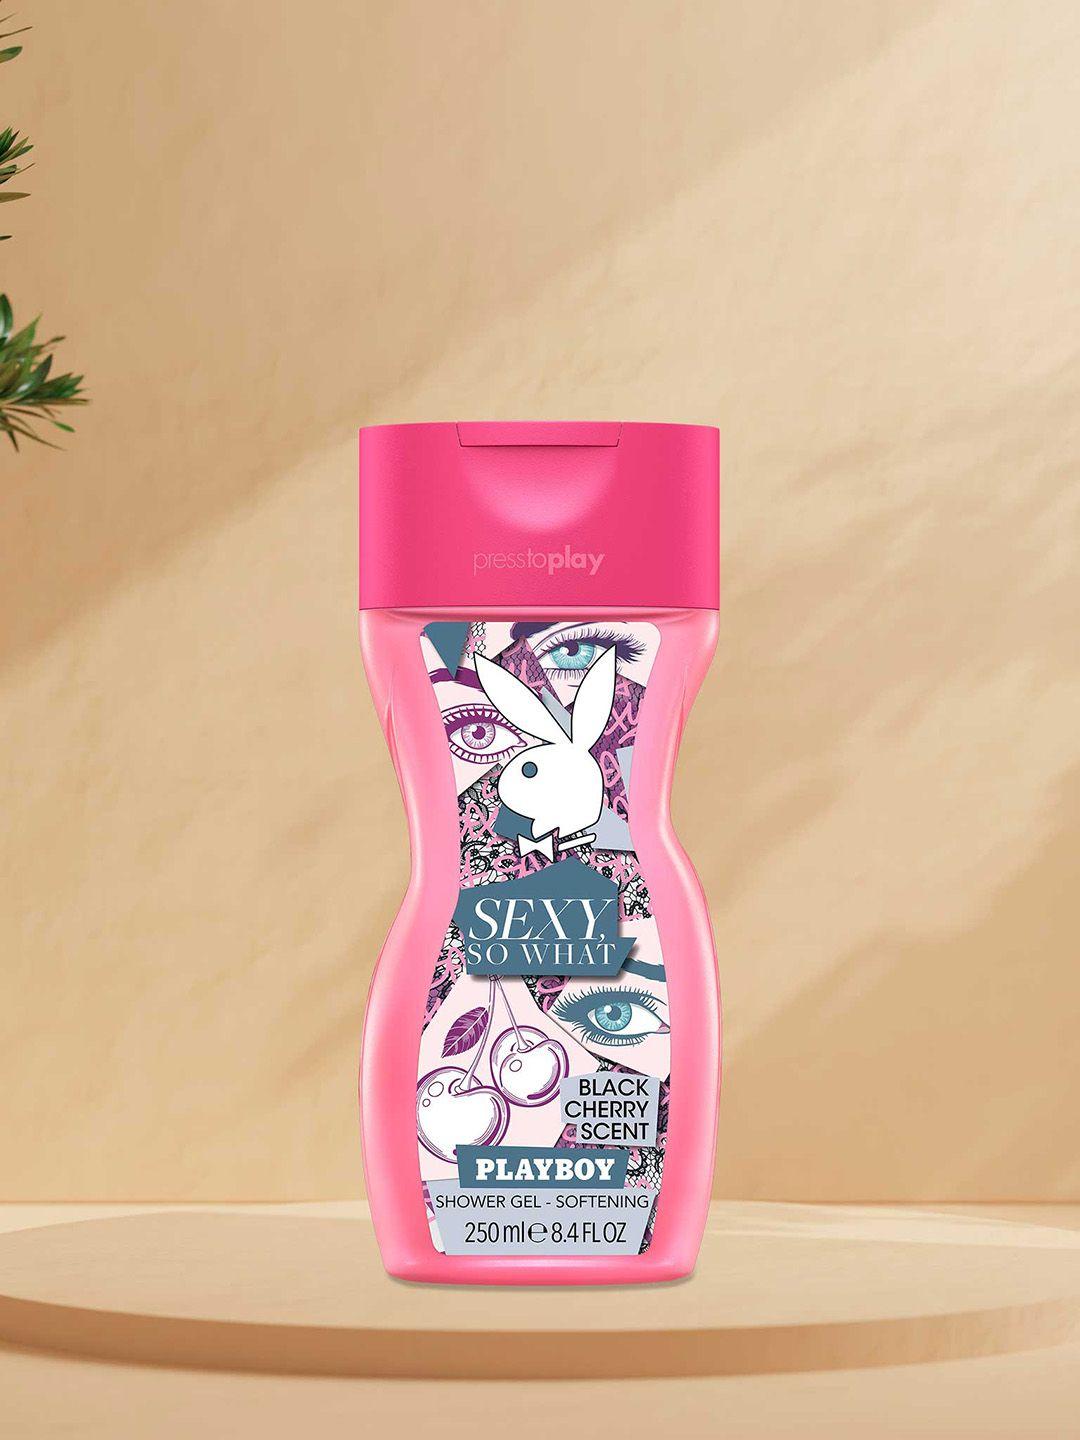 playboy sexy so what softening shower gel with black cherry scent - 250 ml